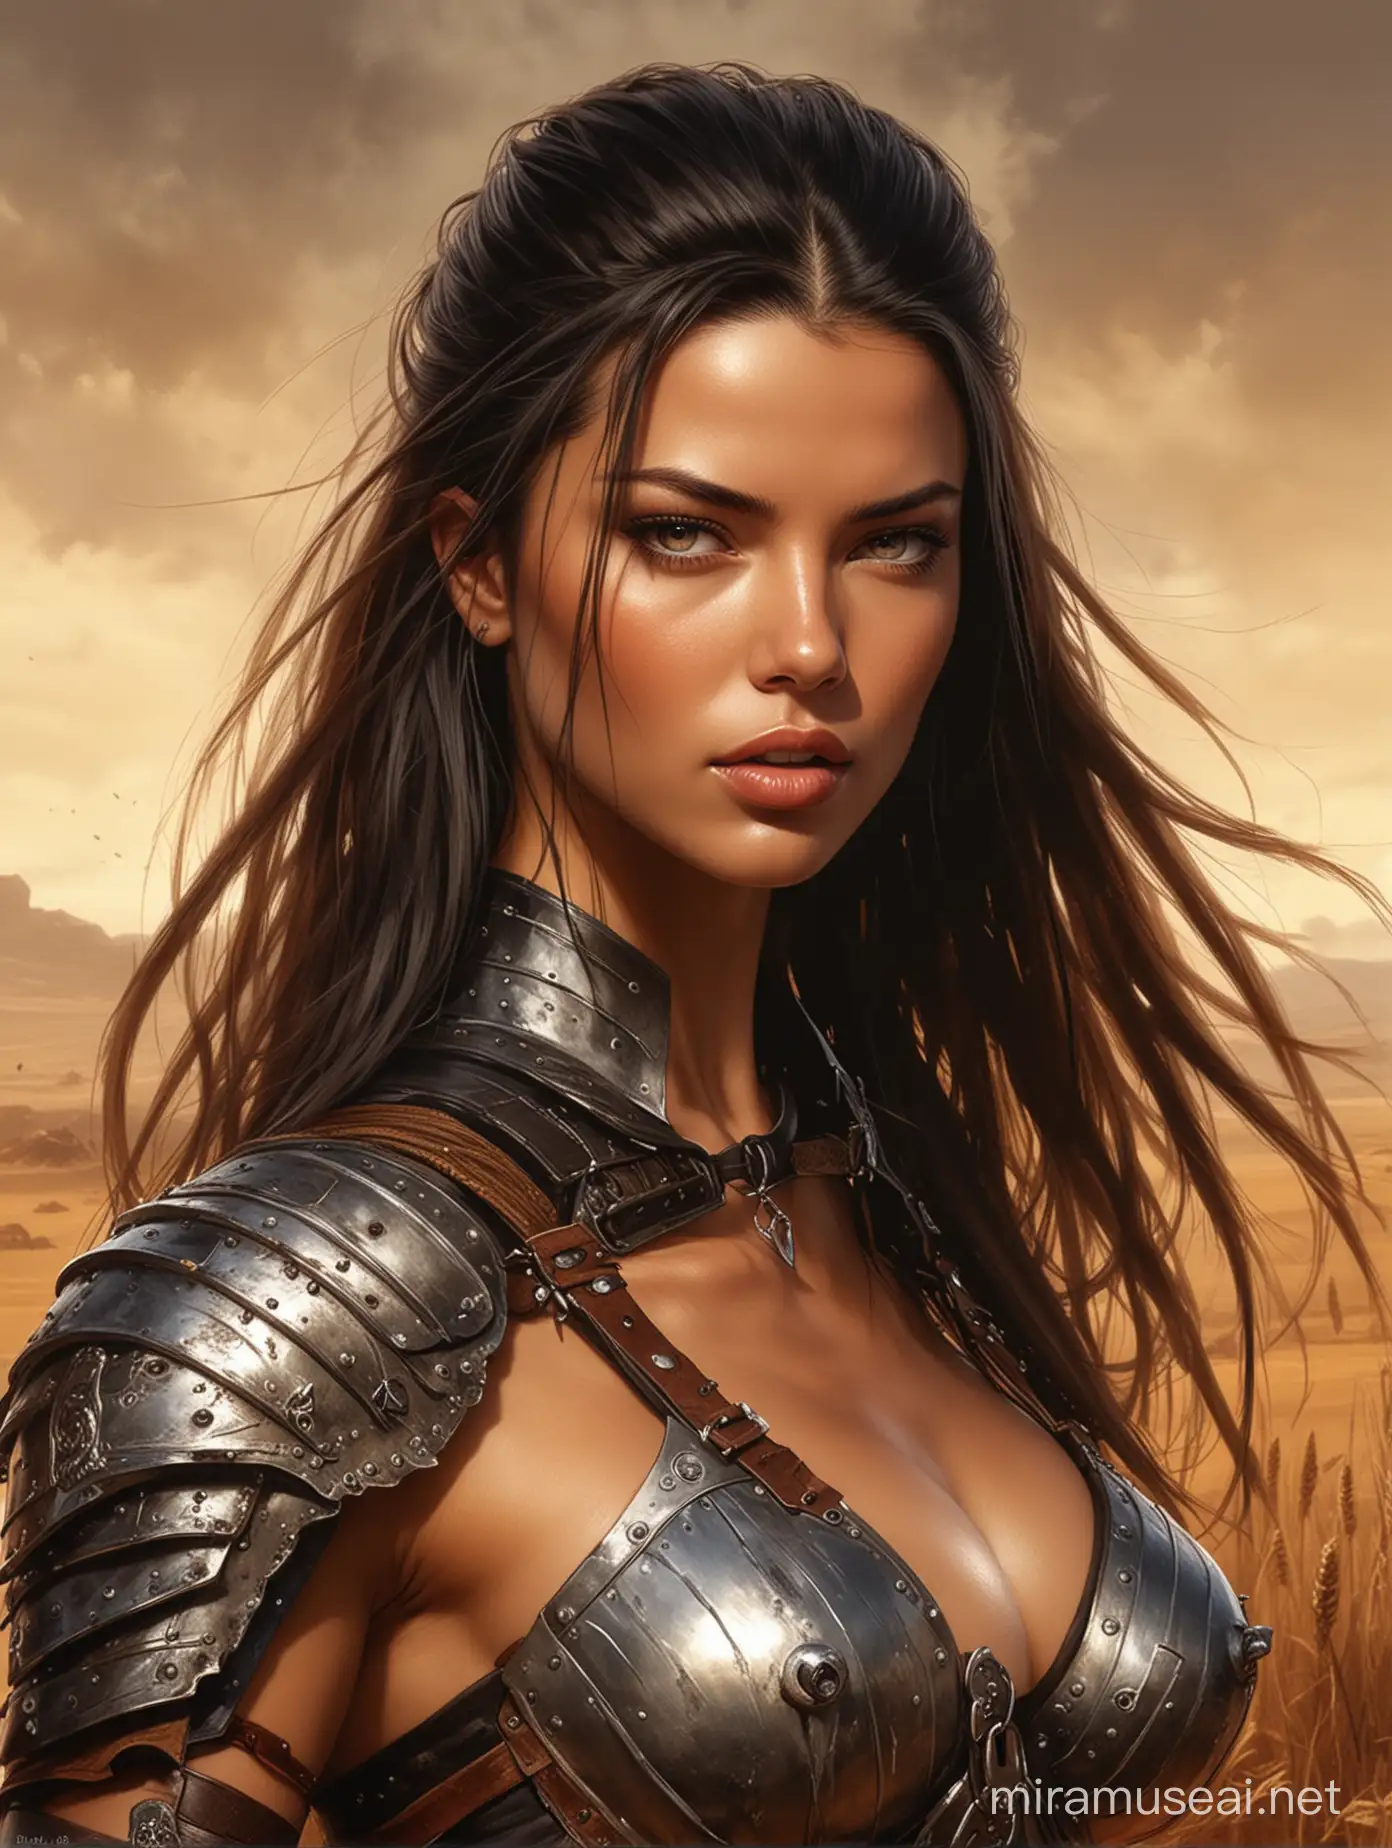 adriana lima, wide-angle portrait painting of . Style of Luis Royo inspired fantasy female warrior art. black, tan, wheat, rosybrown colors. 8K HD